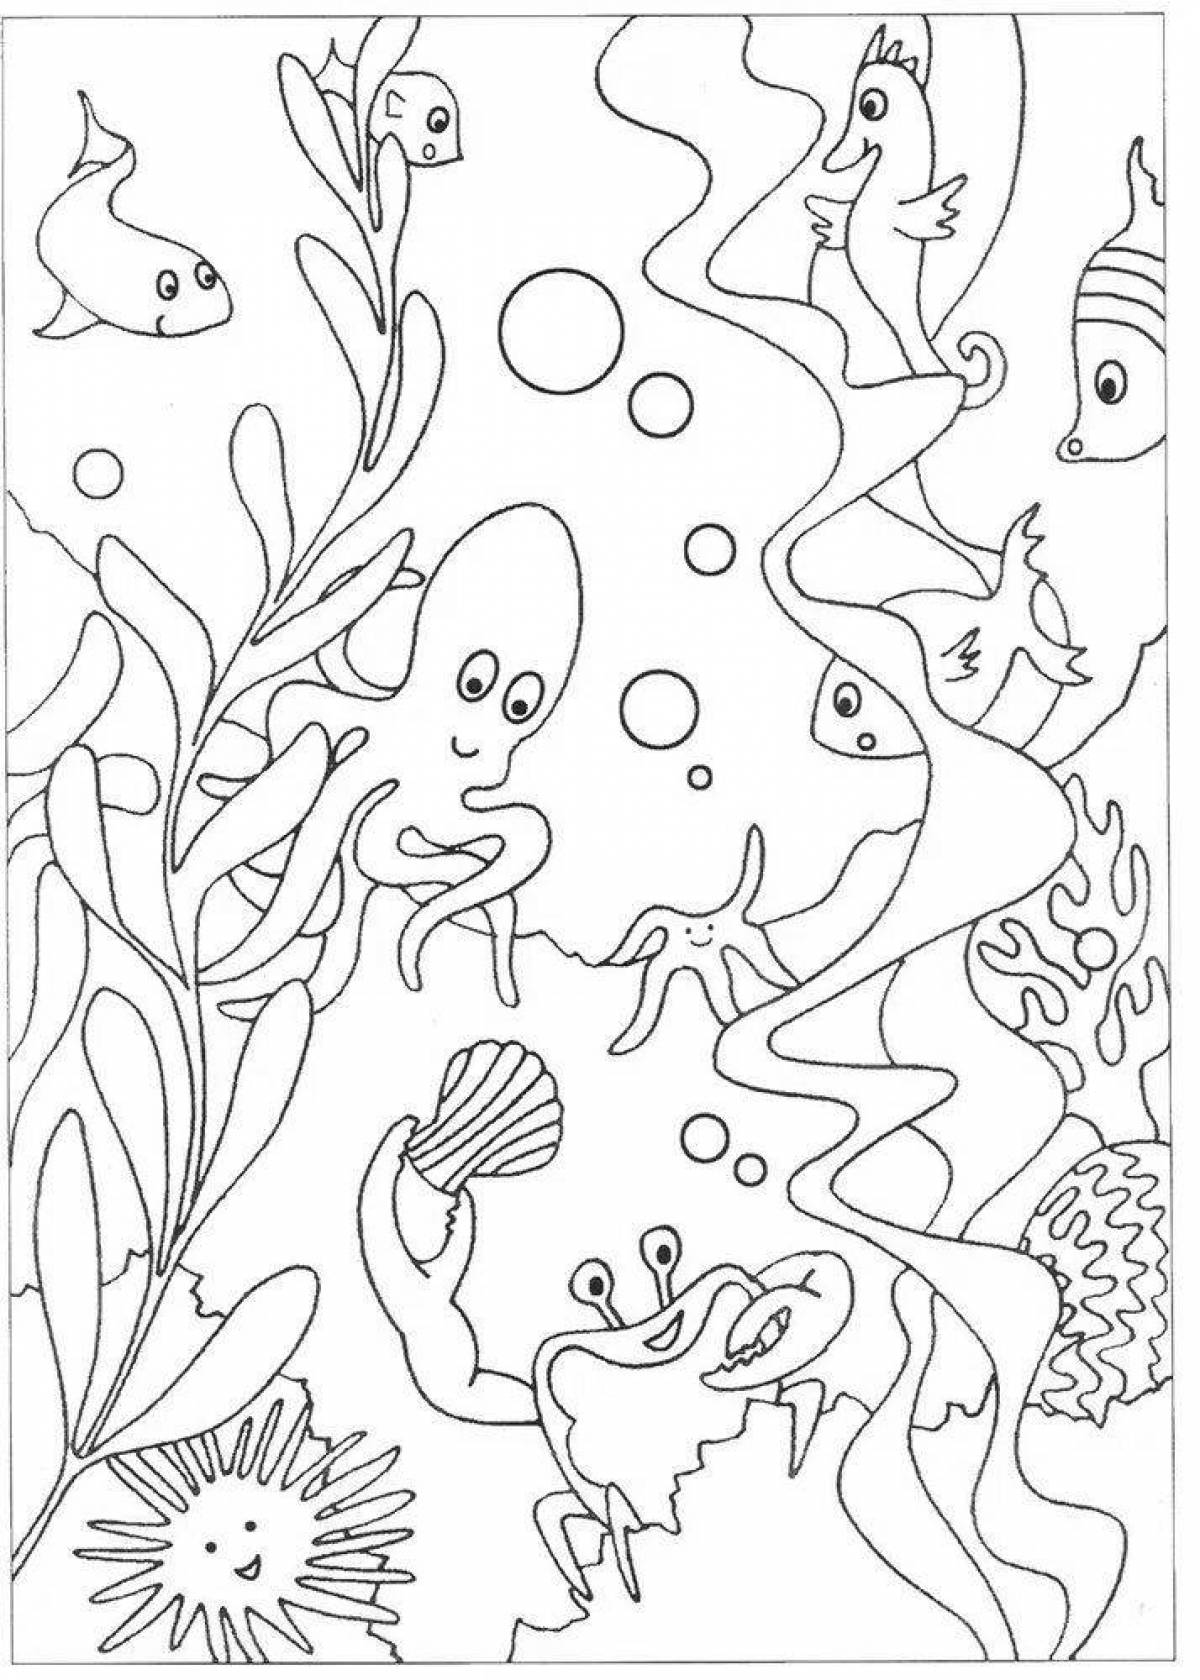 Coloring page mysterious sea world